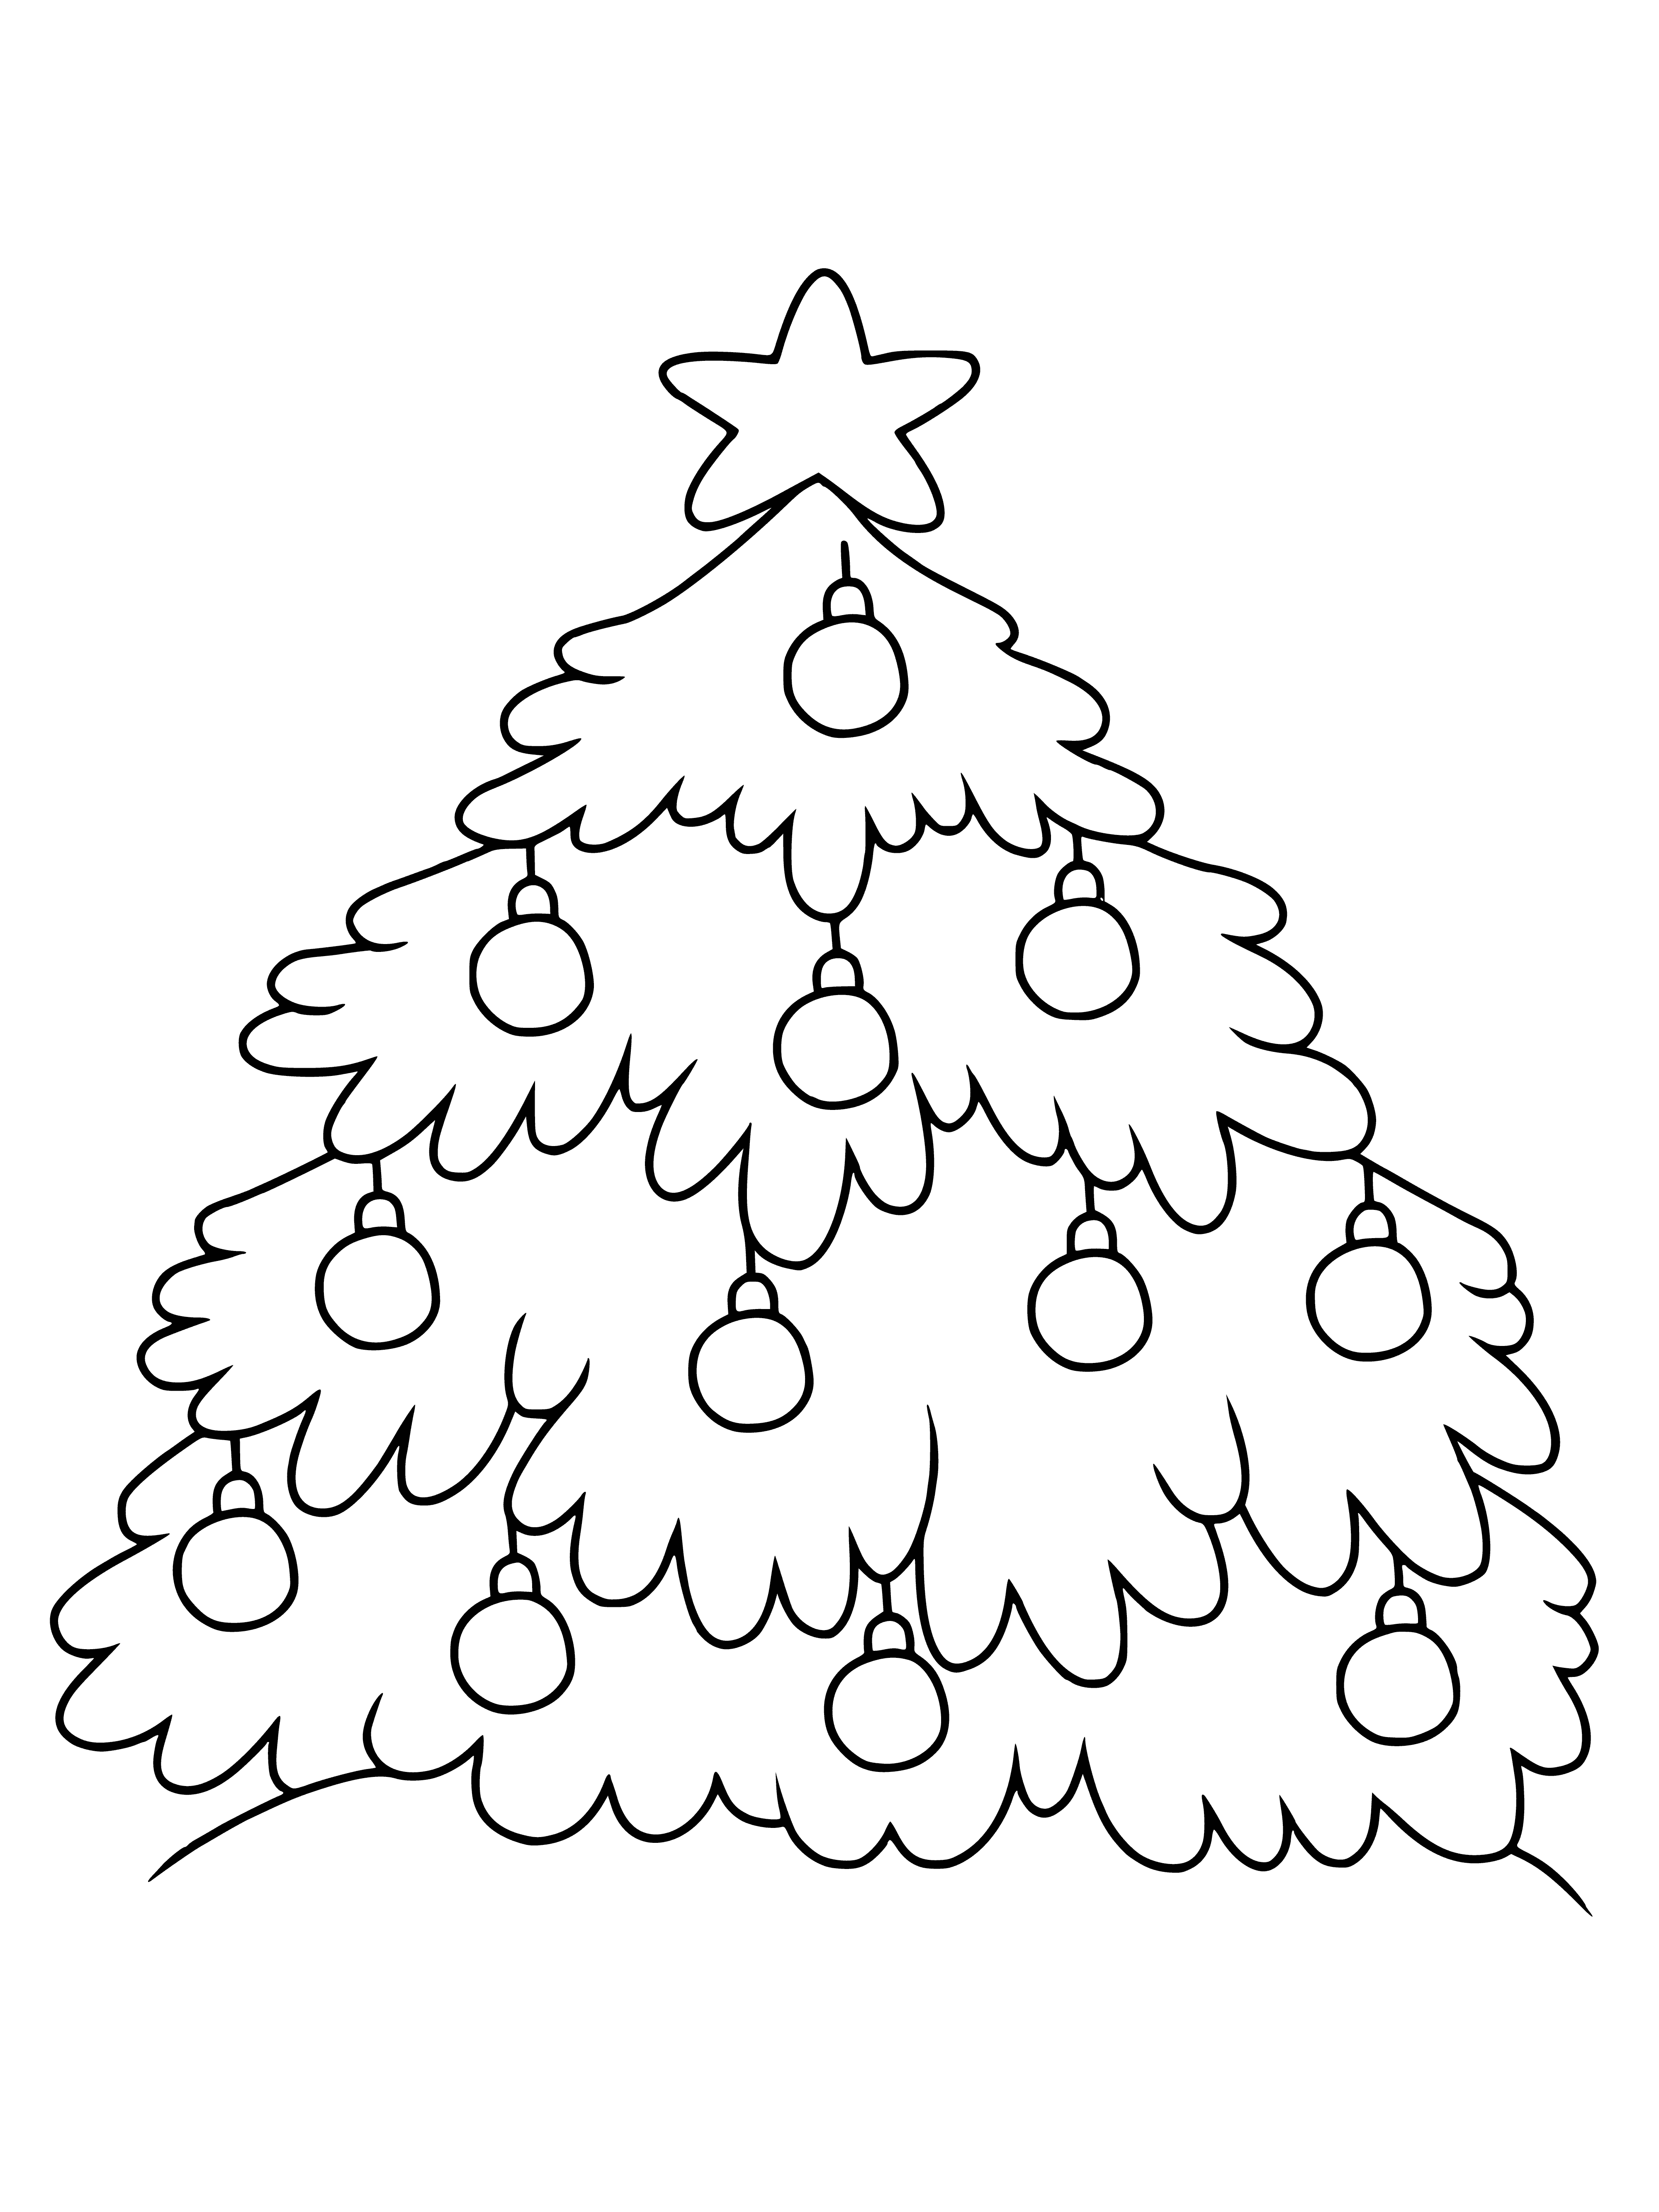 3 Christm. trees w/ diff. col. lights & ornaments: tallest has star, smaller has angel, & 3rd has bow. #ColoringFun